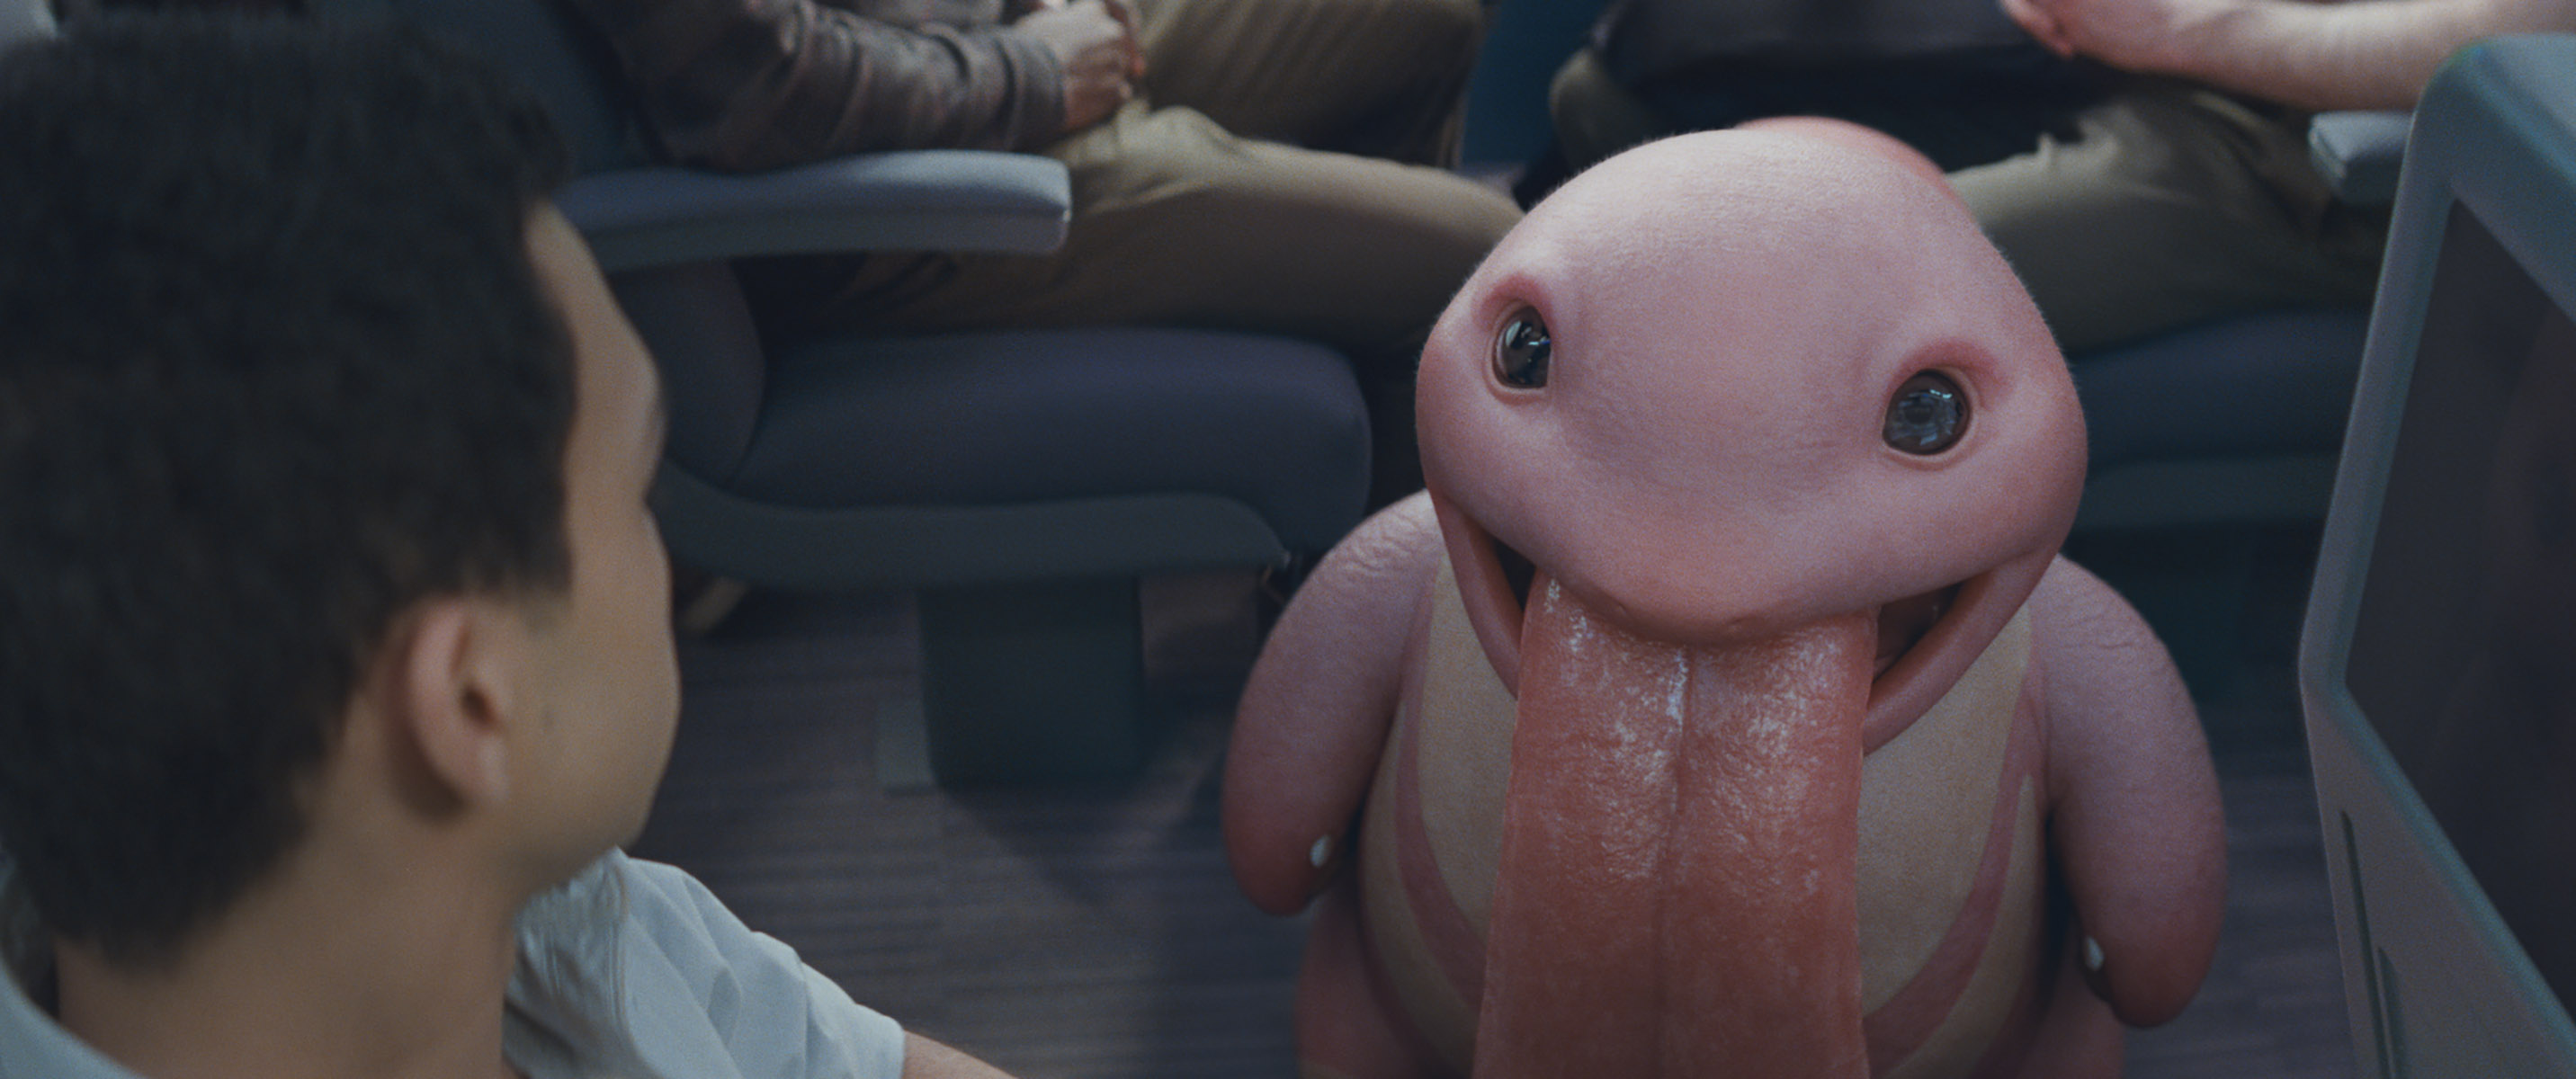 Lickitung in "Detective Pikachu." (Courtesy of Warner Bros. Pictures)